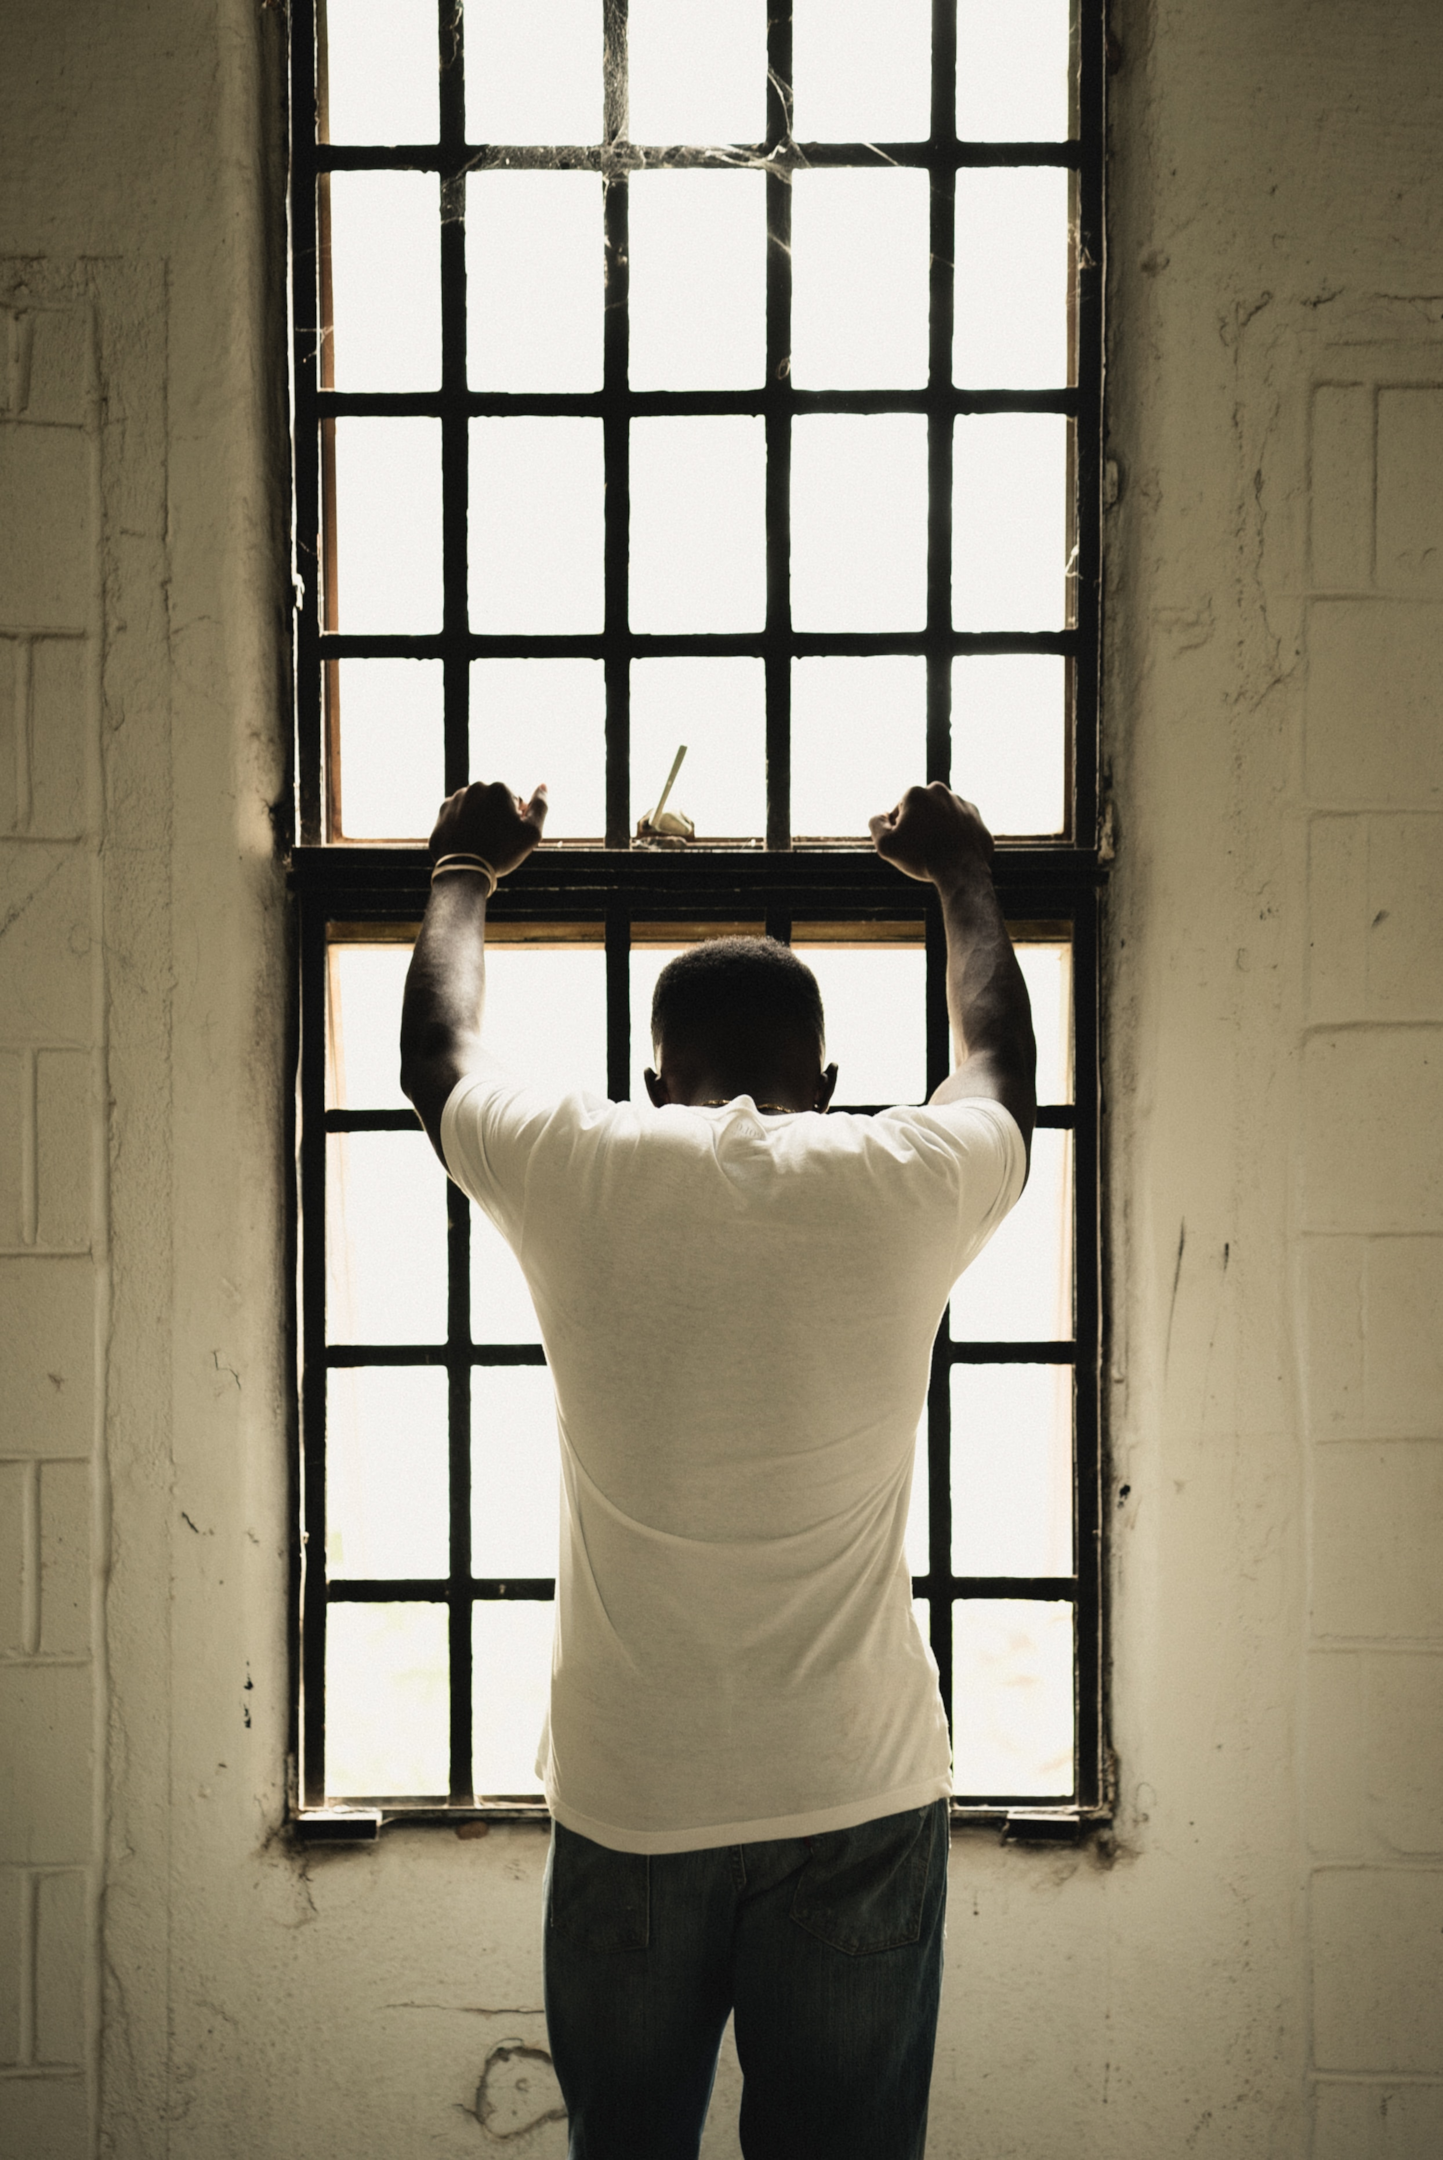 For an incarcerated person, freedom is not taken for granted. A Texas parole lawyer can help.